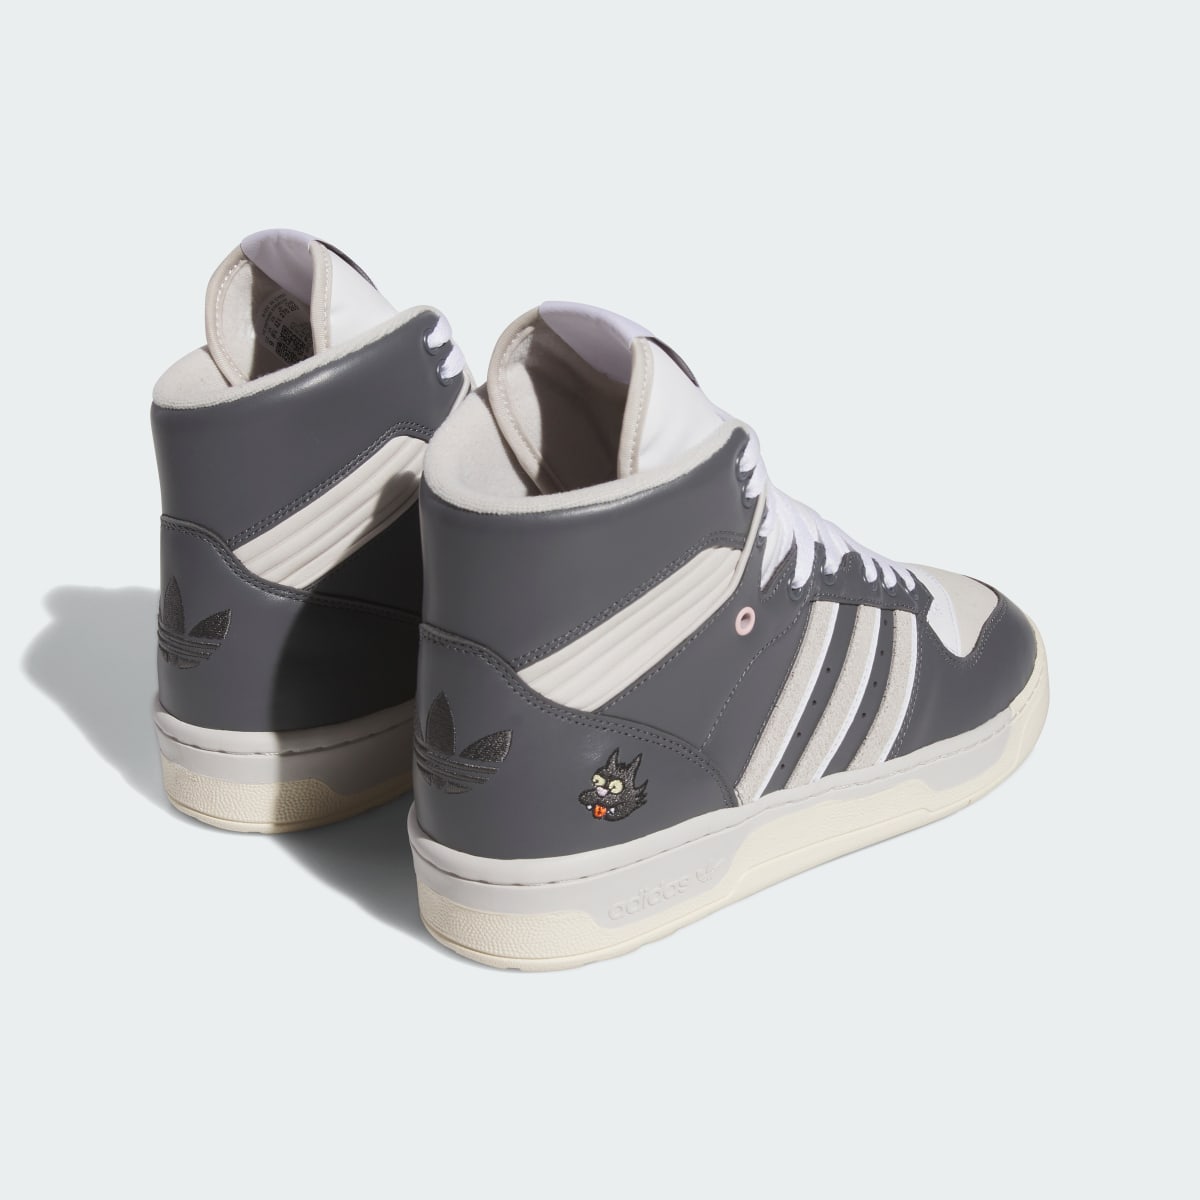 Adidas Rivalry High Scratchy Schuh. 8